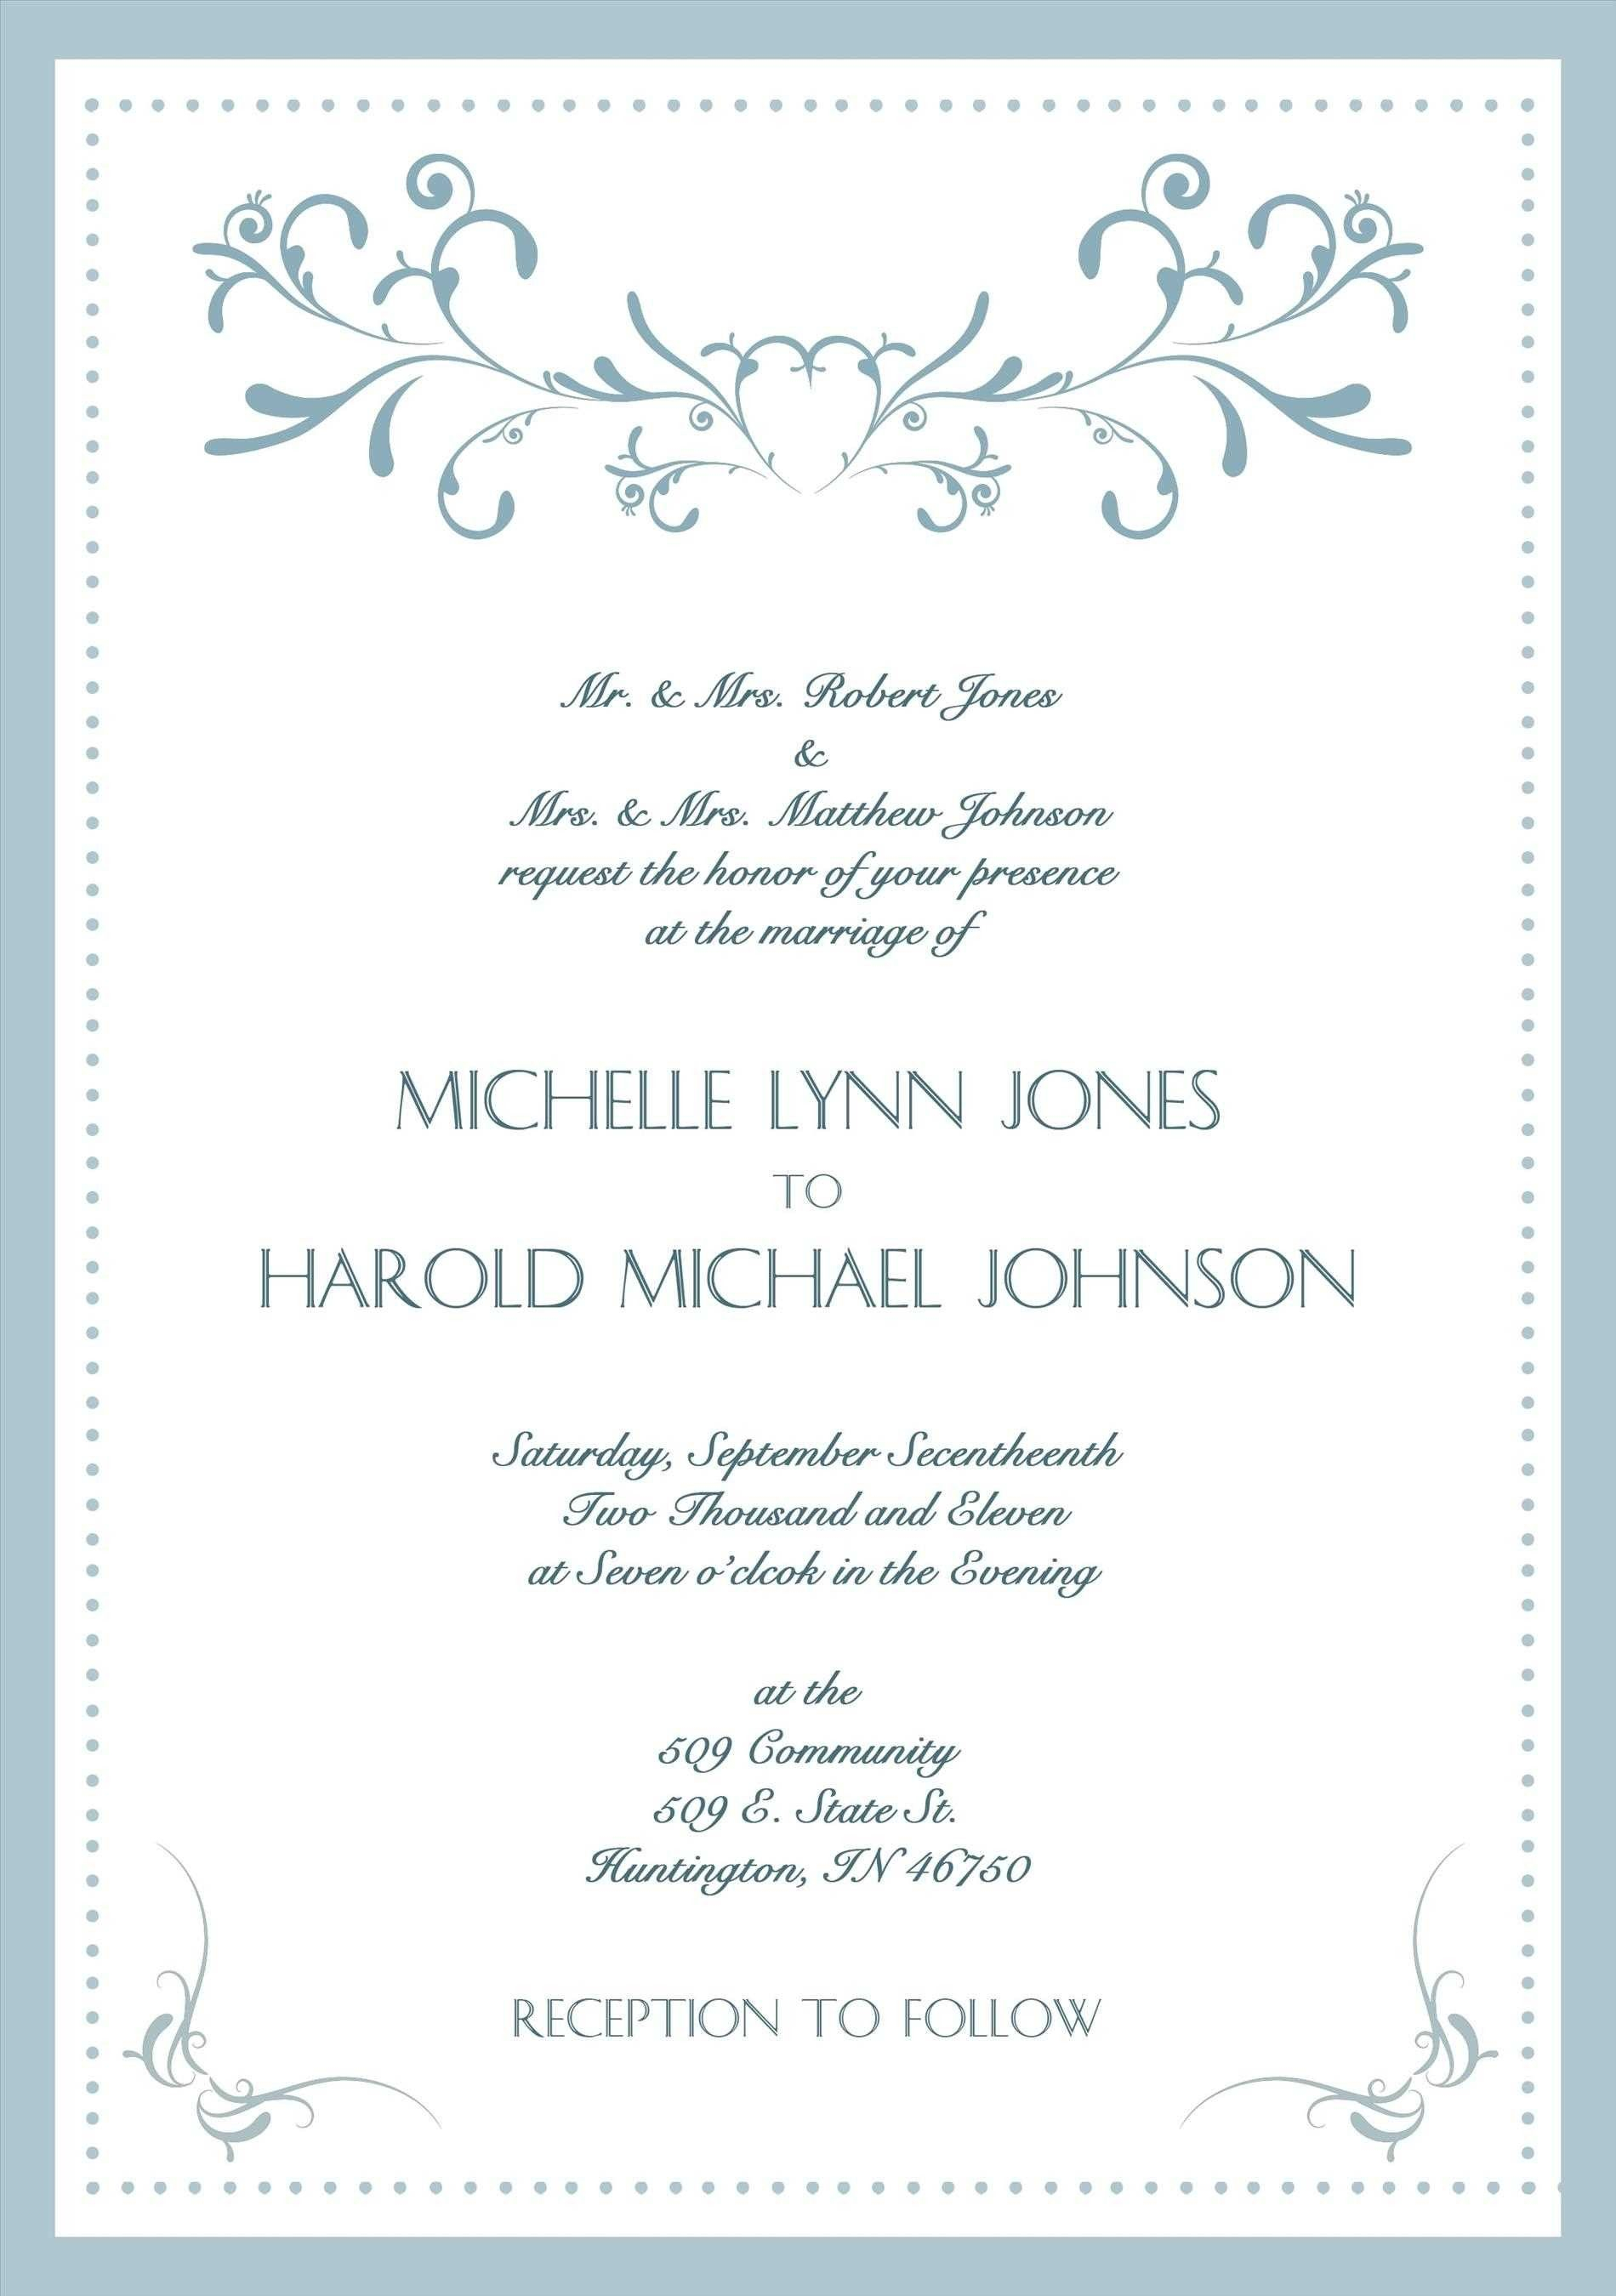 Lovely Formal Wedding Invitation Wording Cars In 2019 Second pertaining to dimensions 1900 X 2700